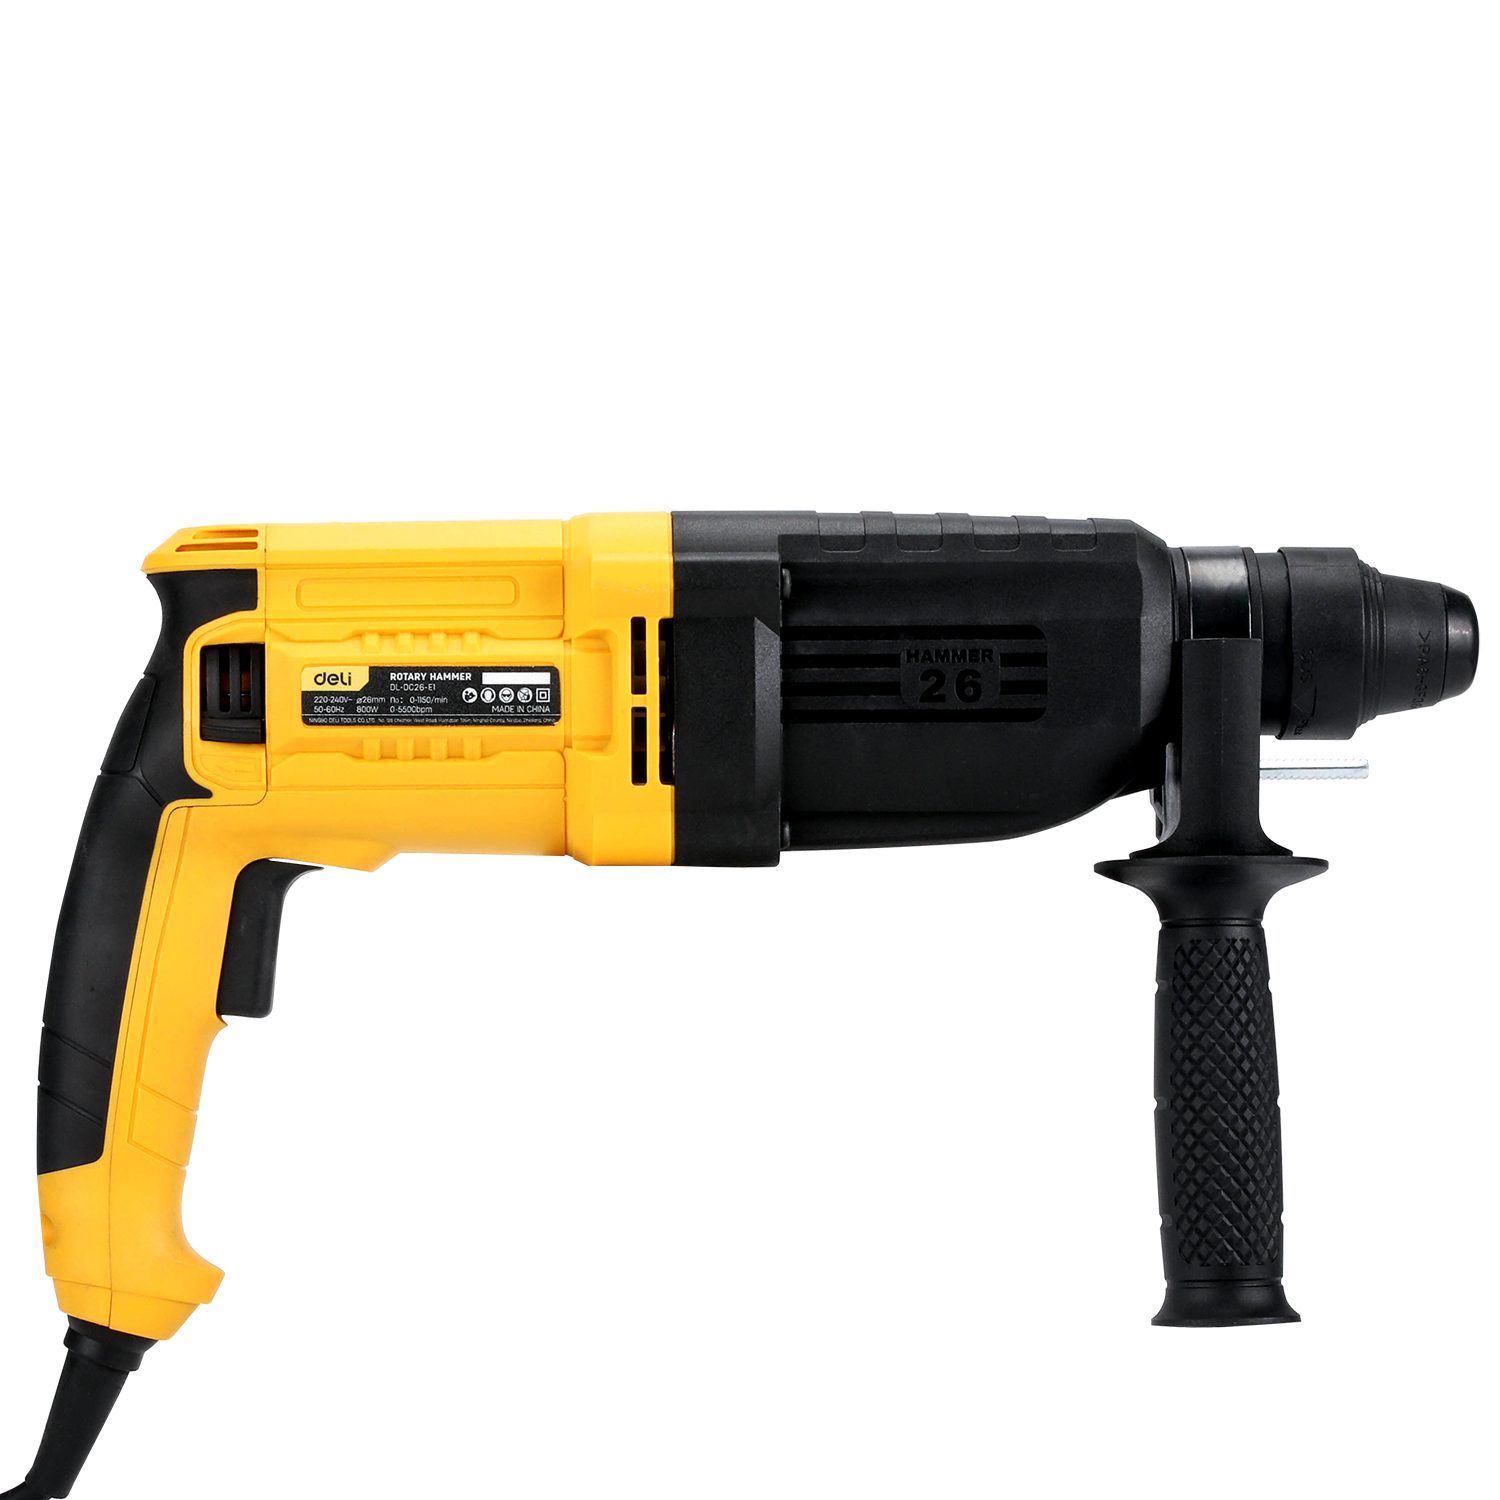 Industrial Quality Lightweight Rotary Hammer For Wood